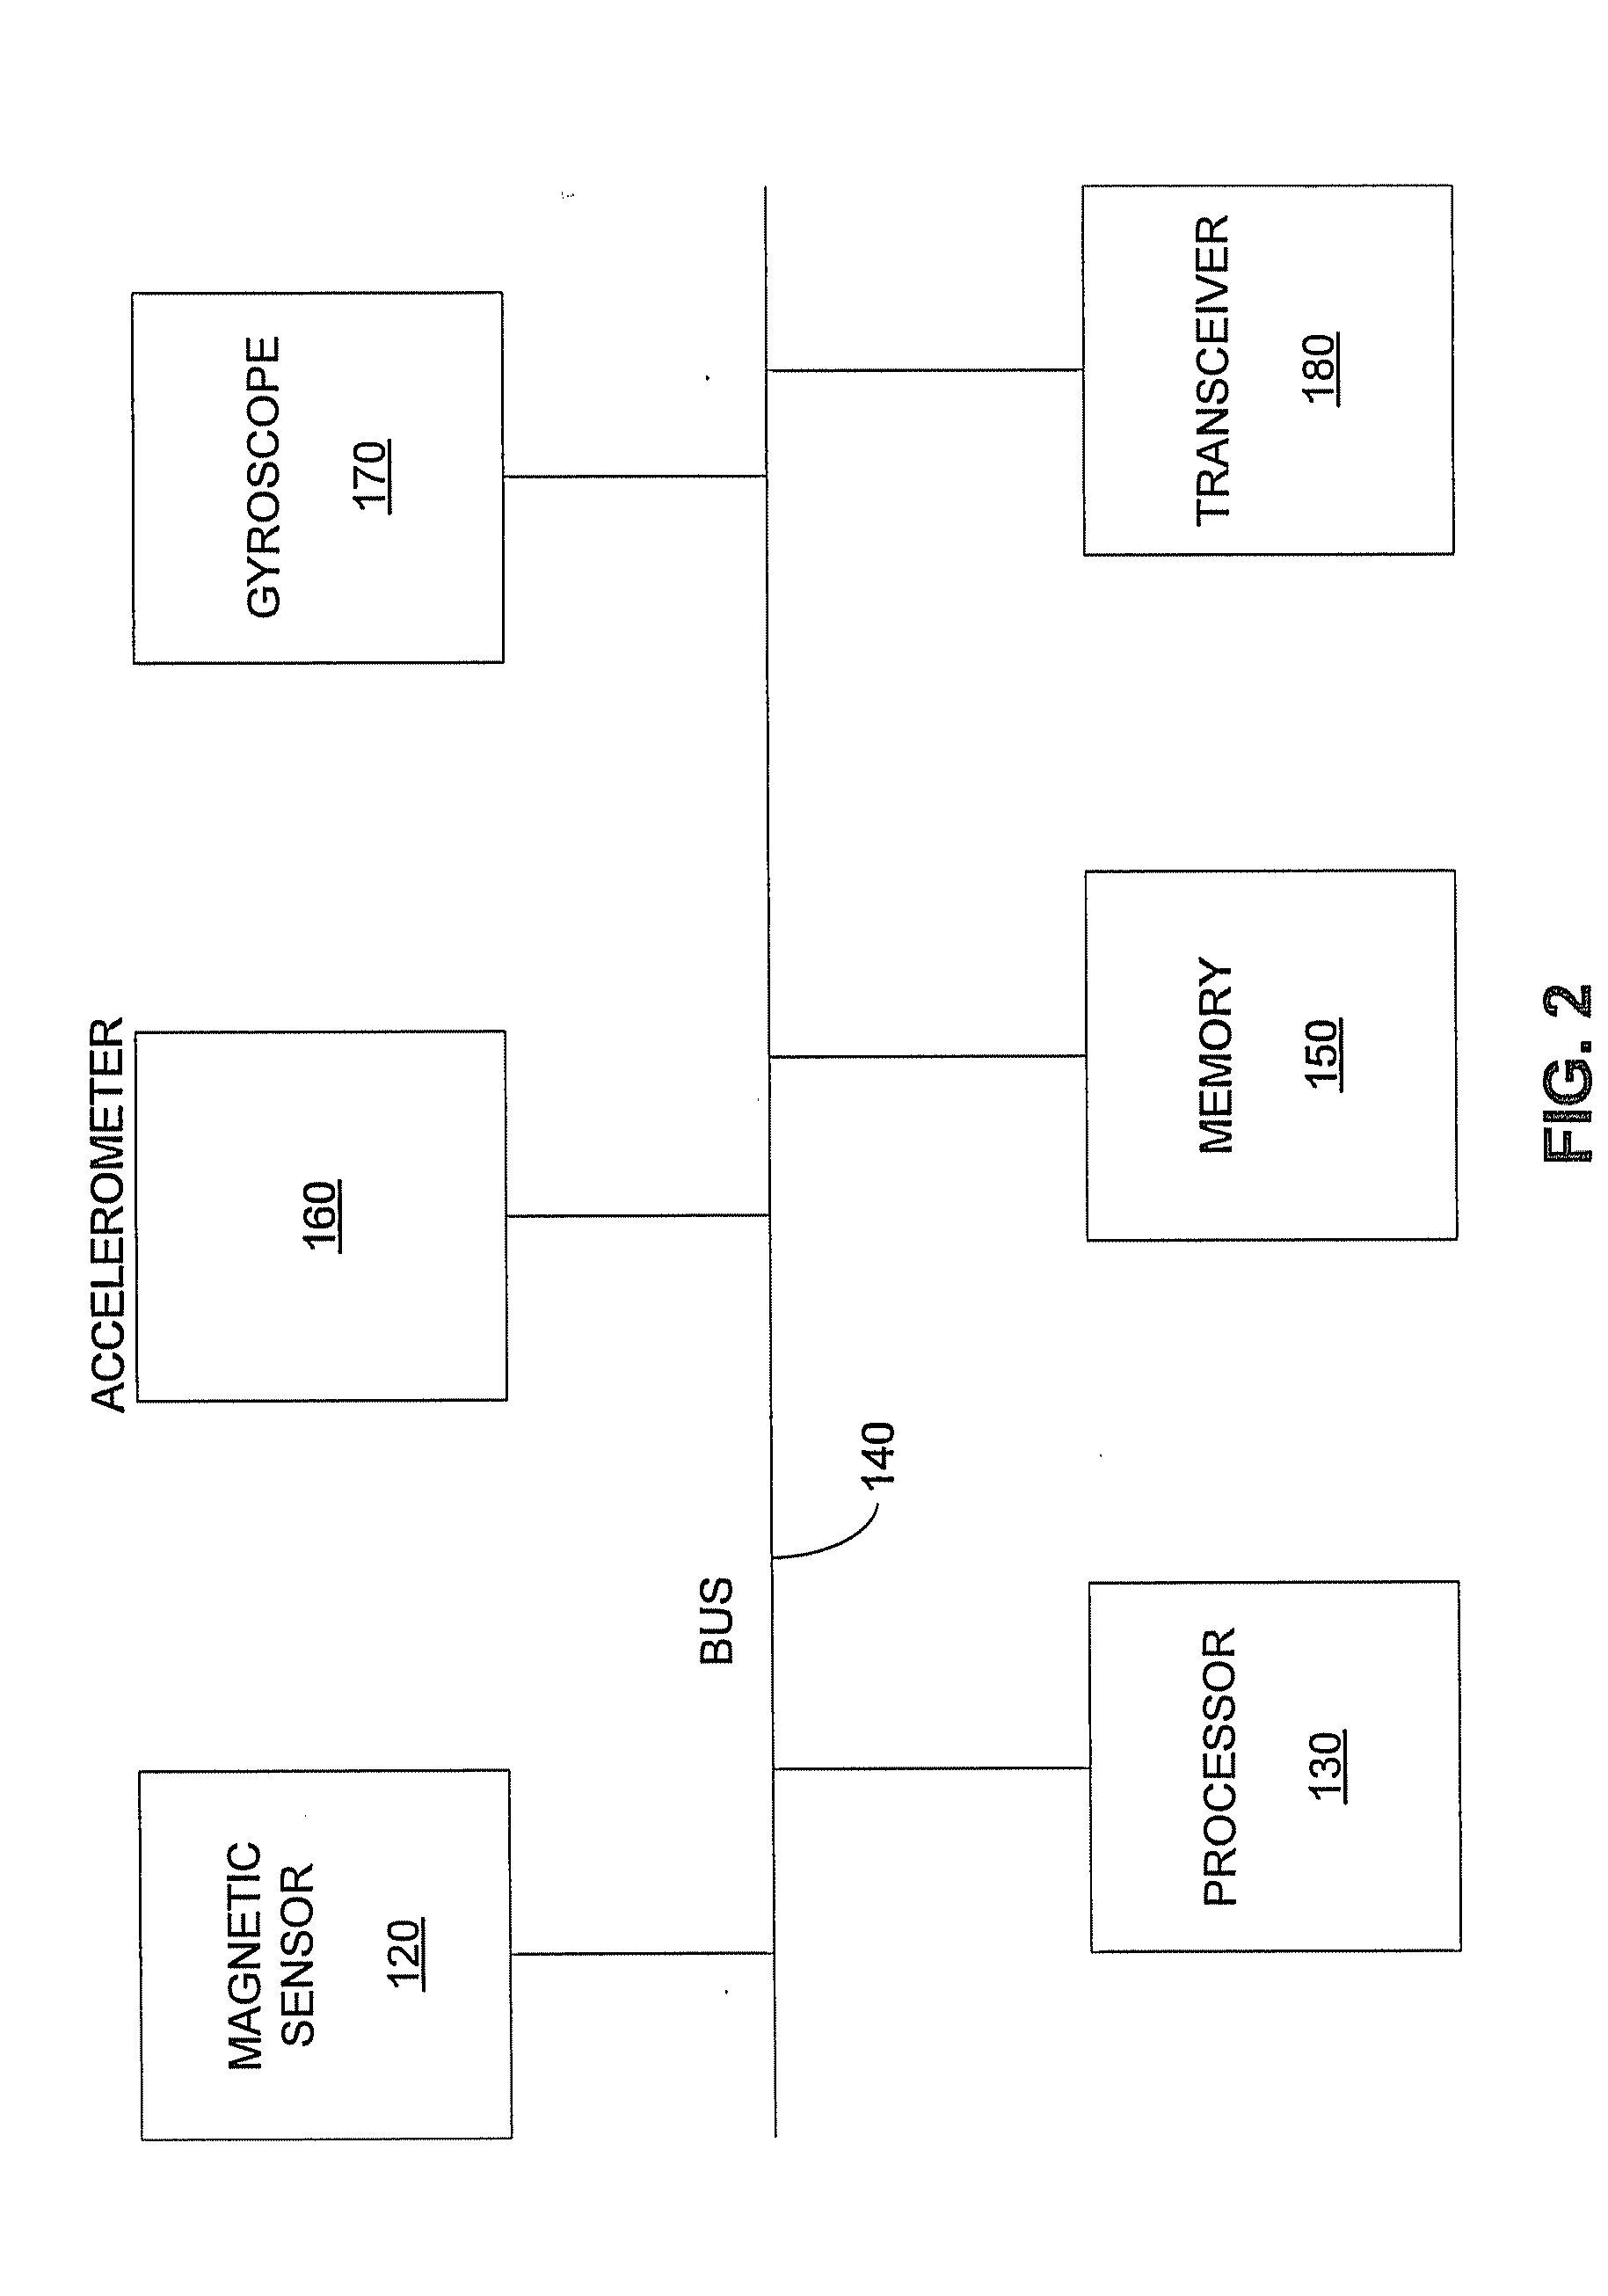 System and Method for Code Communication